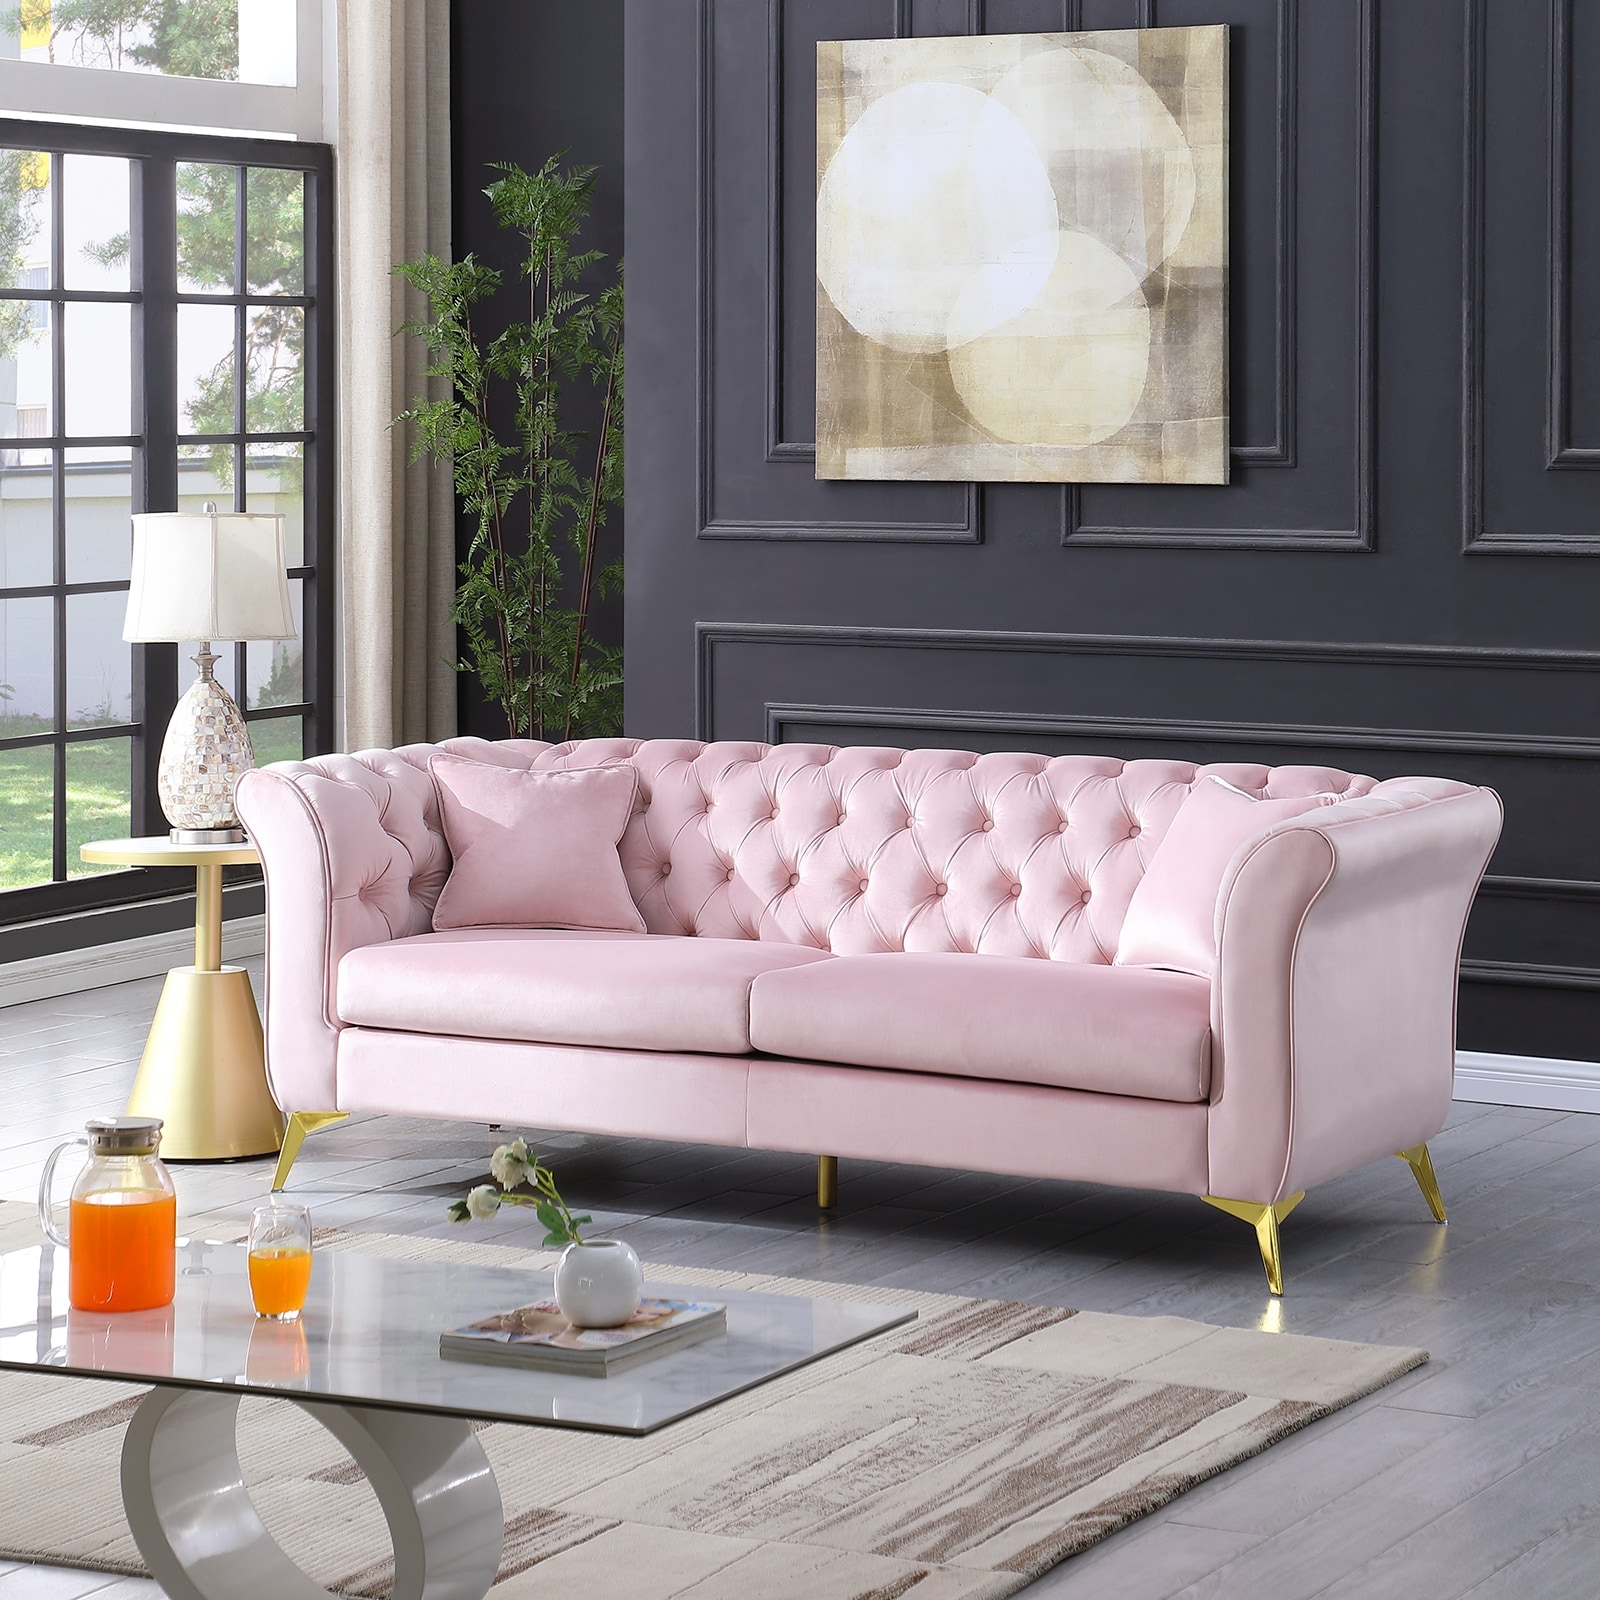 https://ak1.ostkcdn.com/images/products/is/images/direct/d950e32eba6ce576576c8c81ac461078c7a377a1/2-Piece-Velvet-Upholstered-3-Seater-Sofa-and-Loveseat-Sets%2C-Living-Room-Tufted-and-Wrinkled-Fabric-Sofa-with-Accent-Pillows.jpg